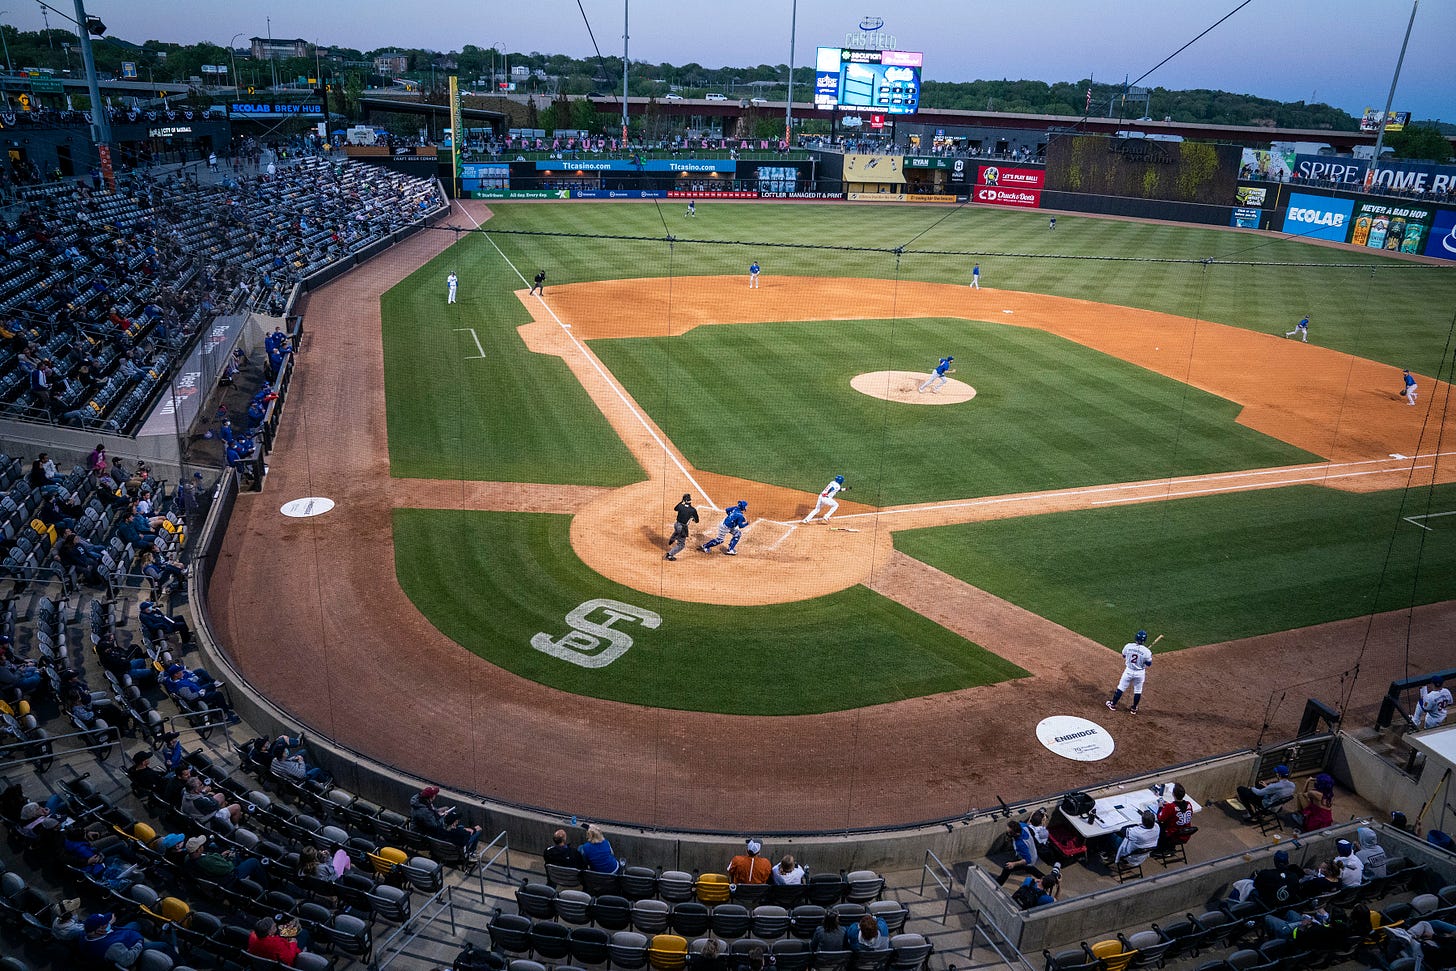 St. Paul Saints fans miss quality and 'craziness' of independent ball